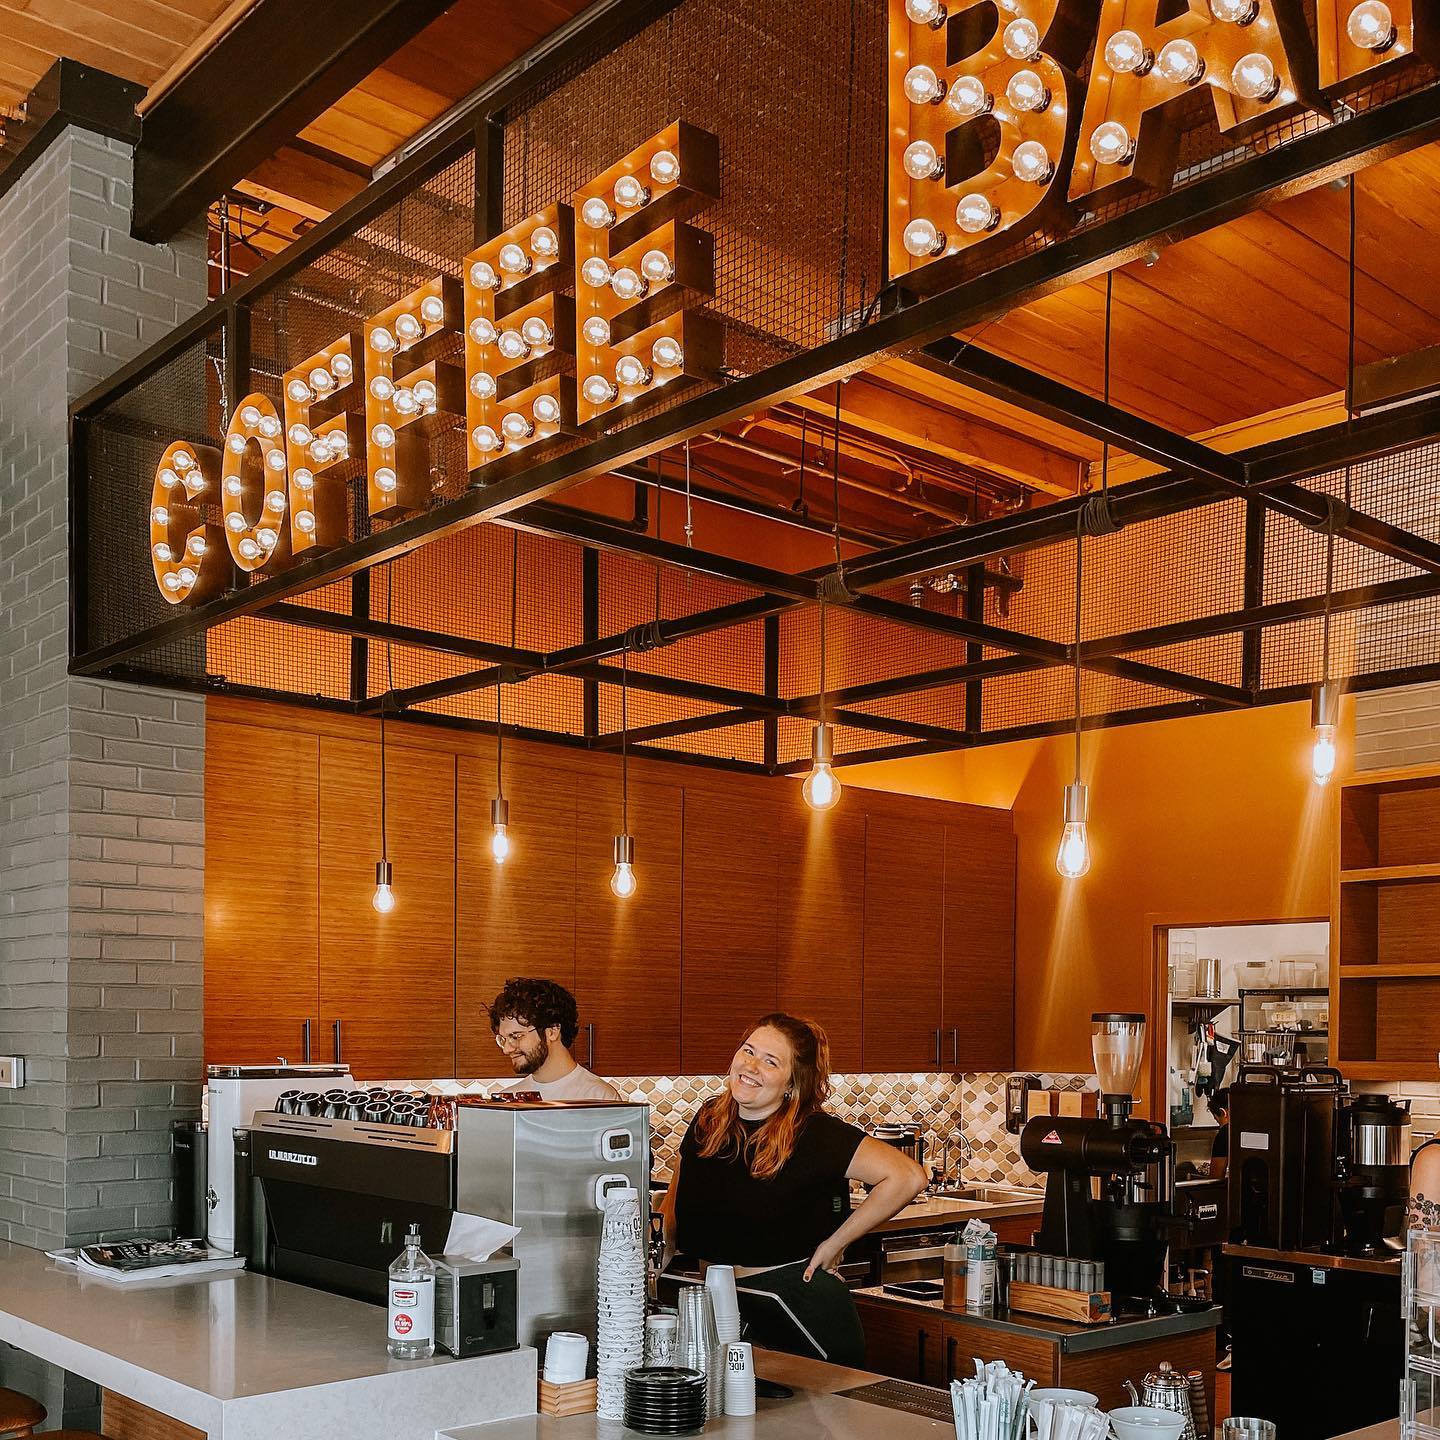 The coffee bar at Fidel & Co Coffee Roasters